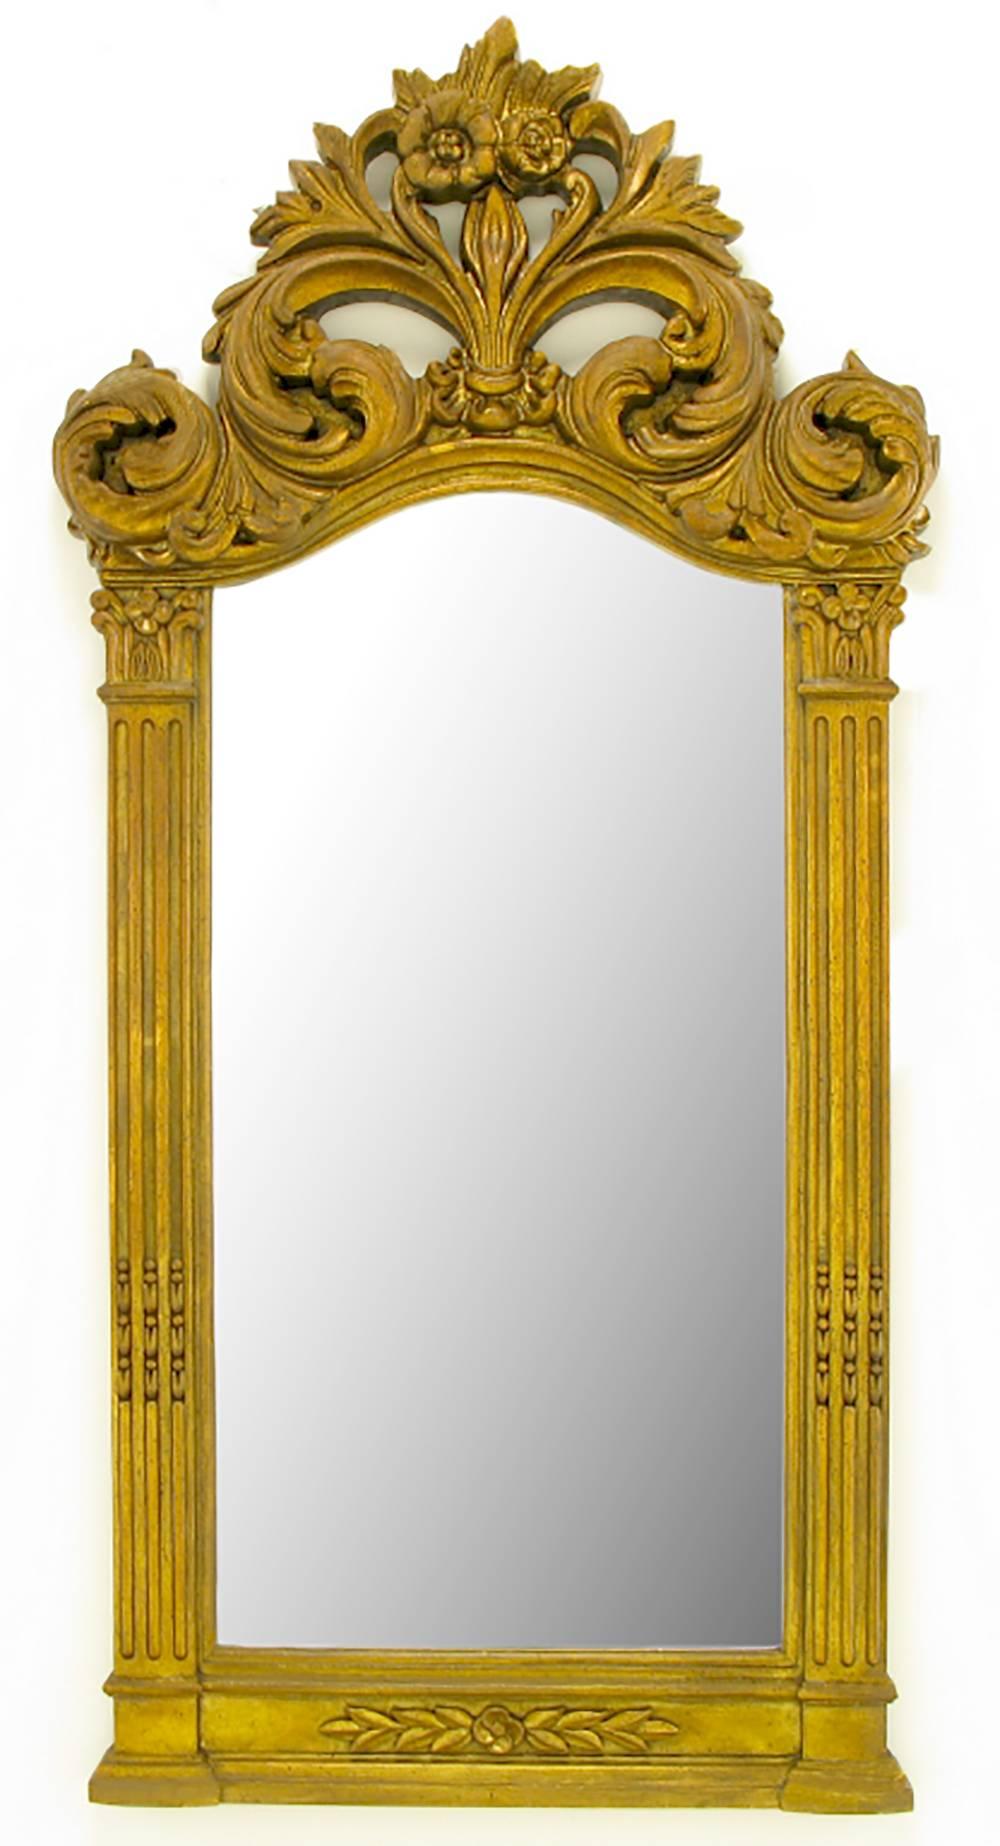 Large and impressive pair of aged gilt Rococo style framed mirrors with pierced and foliate detailed crowns. Could be used over a pair of consoles or in a double vanity bathroom.